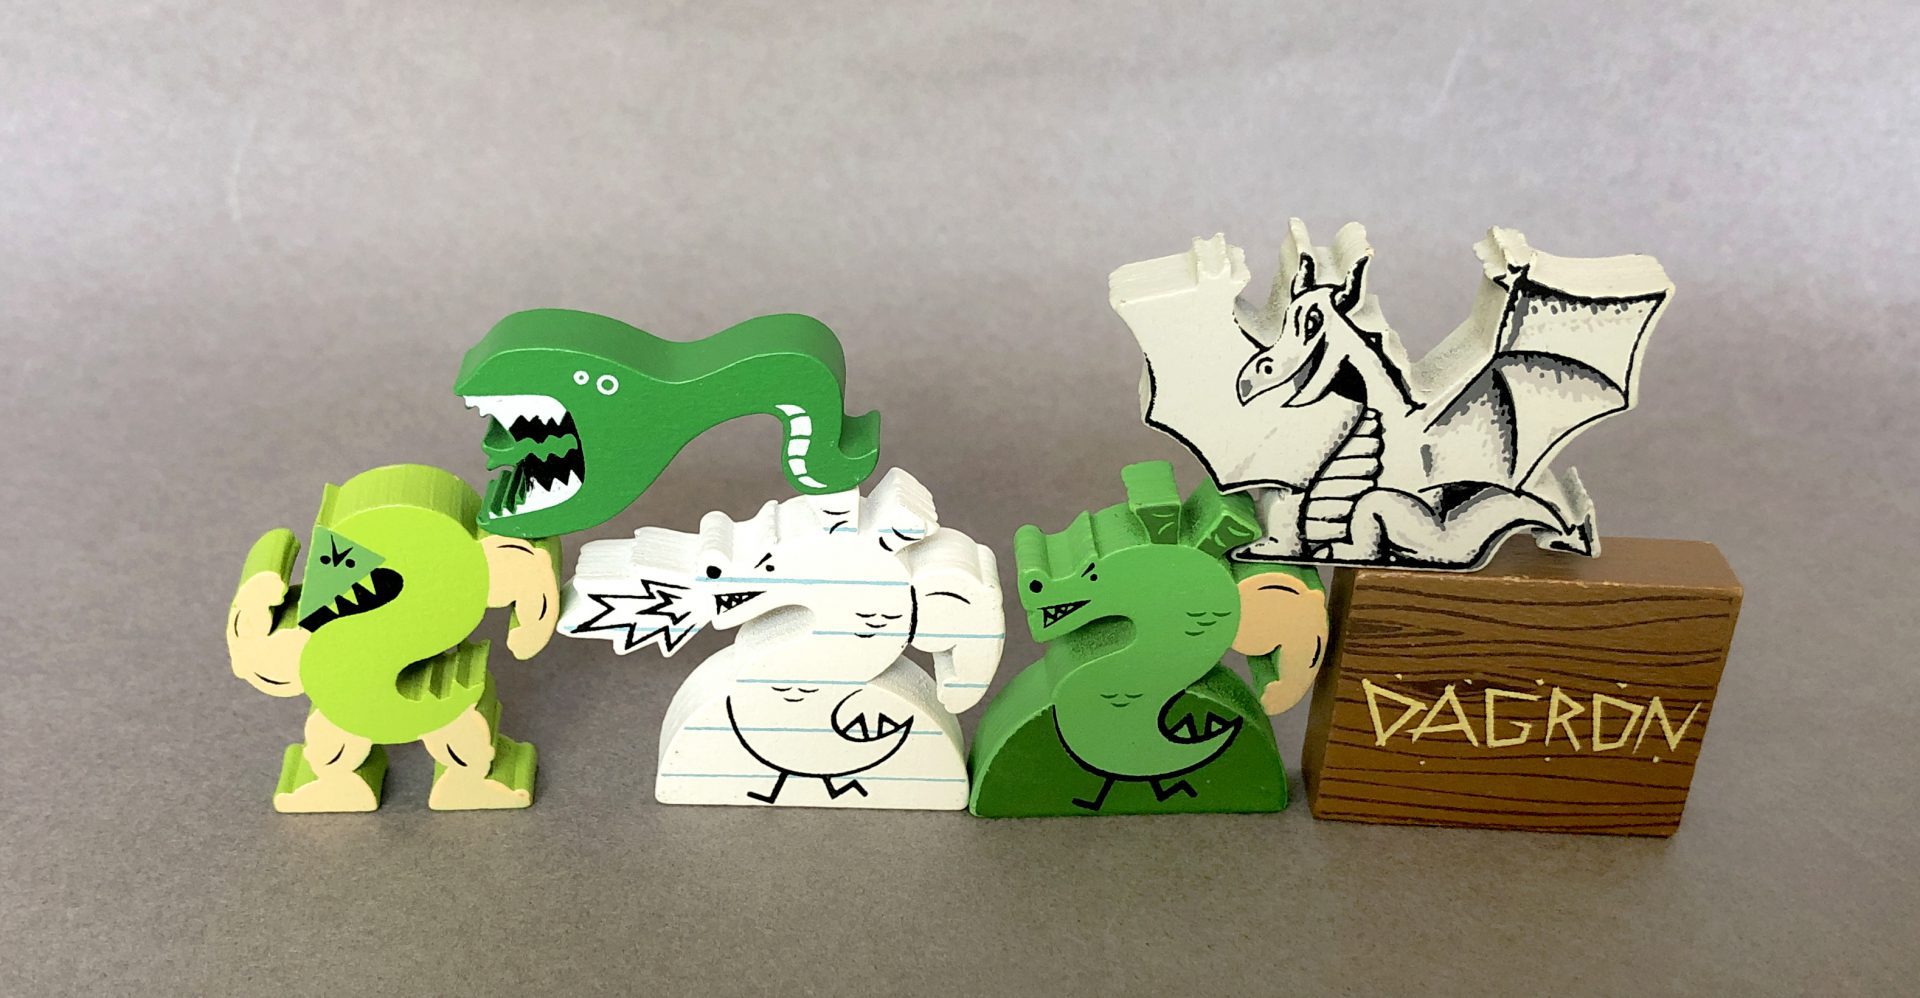 A Variety of Trogdor Meeples